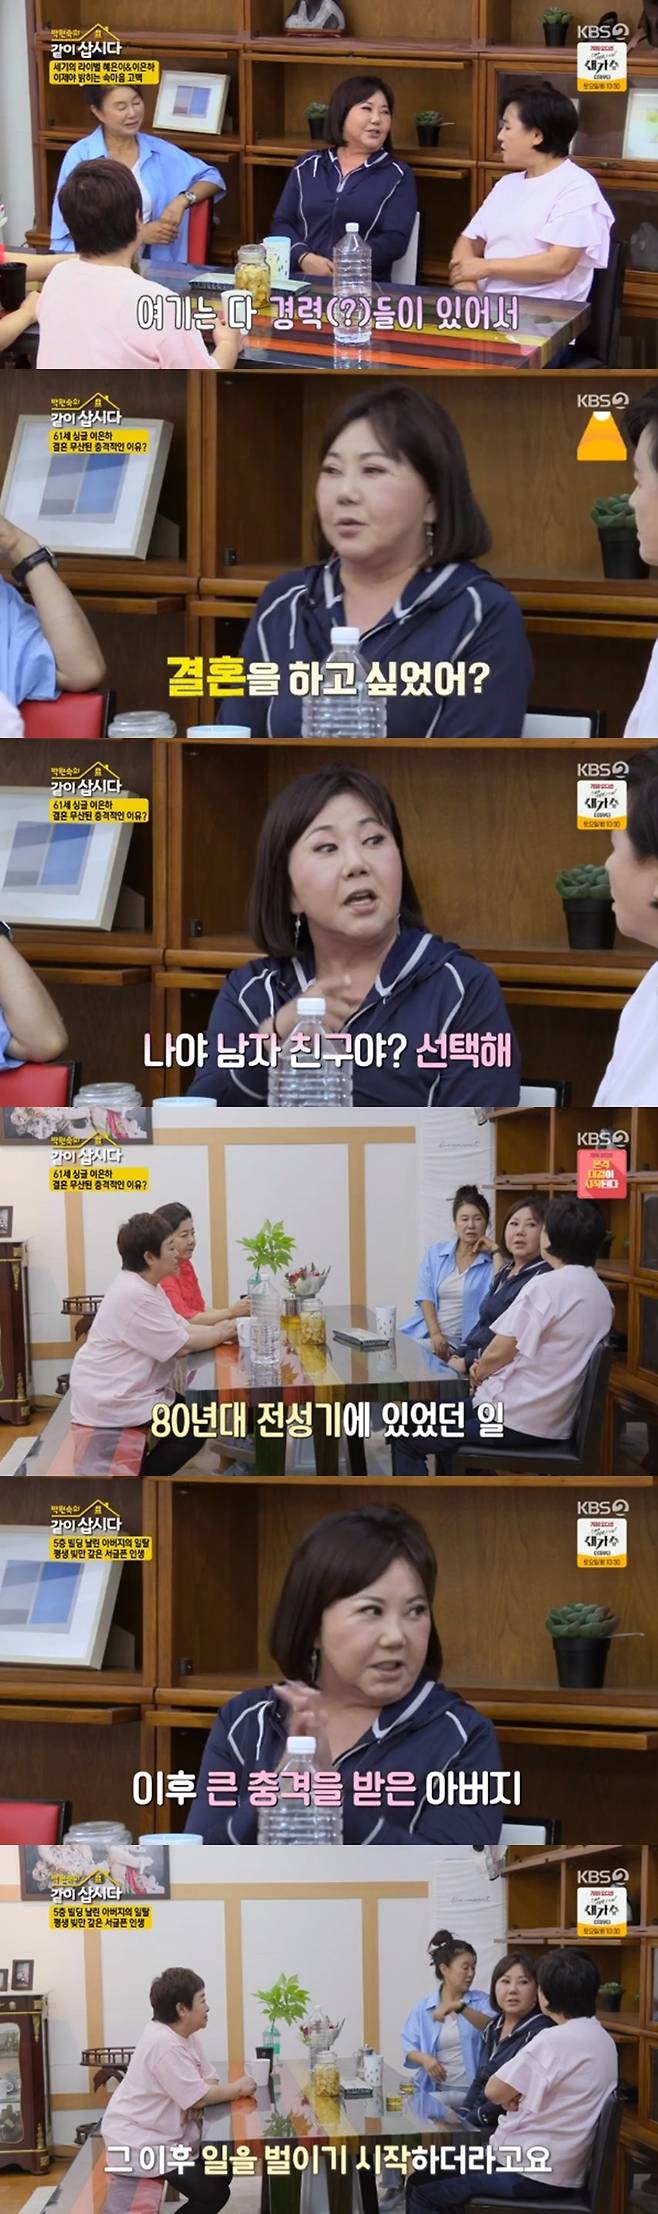 Singer Lee Eun-ha has been a guest on KBS 2TV Park Won-sooks Sapsida 3 broadcasted on the 25th.Lee Eun-ha, a former rival to the former Sep Sida 3 member Hye Eun Yi. Sister was as thin as a skewer since then. I was busy then.When I go to the province together, I eat a piece of bread while I starve, and I worry about Hye Eun Yi, but he told me, Do you eat again?Sister did not even marriage brilliantly. I stayed. (Sister) did not be so cool.I am a virgin who has not yet marriage, he said. Lee Eun-ha, 61, is a single this year.The members asked, Did you want to marriage? He said, I did not have it. I had one time, but my father had a very bad open position.When I was singing from the age of 13, my father was the law.I was a one-year-old friend, and I told my father, Give me your sister. My father flew the crystal ashtray right away. In the end, I told him I would not listen to my father.Asked if he regrets it now, he said, I do not think about such a mistake. This is the problem.I think its time to send him. Before that, I thought he was a little girl. The members asked, Is not it money? Because Lee Eun-ha was the head of the family. Lee Eun-ha said, I have never touched money and I have spent my allowance.I met people who were doing construction, and that led to an accident. My father was playing the accordion.I told them that they could pay for the construction around them, so I did all the notes in my name. I dont know what happened.The five-story building, 150 pyeong, has gone away. I have been able to handle the rest of the debt. He also said, If you have money to pay back, you will be charged with criminal charges.So I really lived and worked. Photo = KBS2 Broadcasting Screen